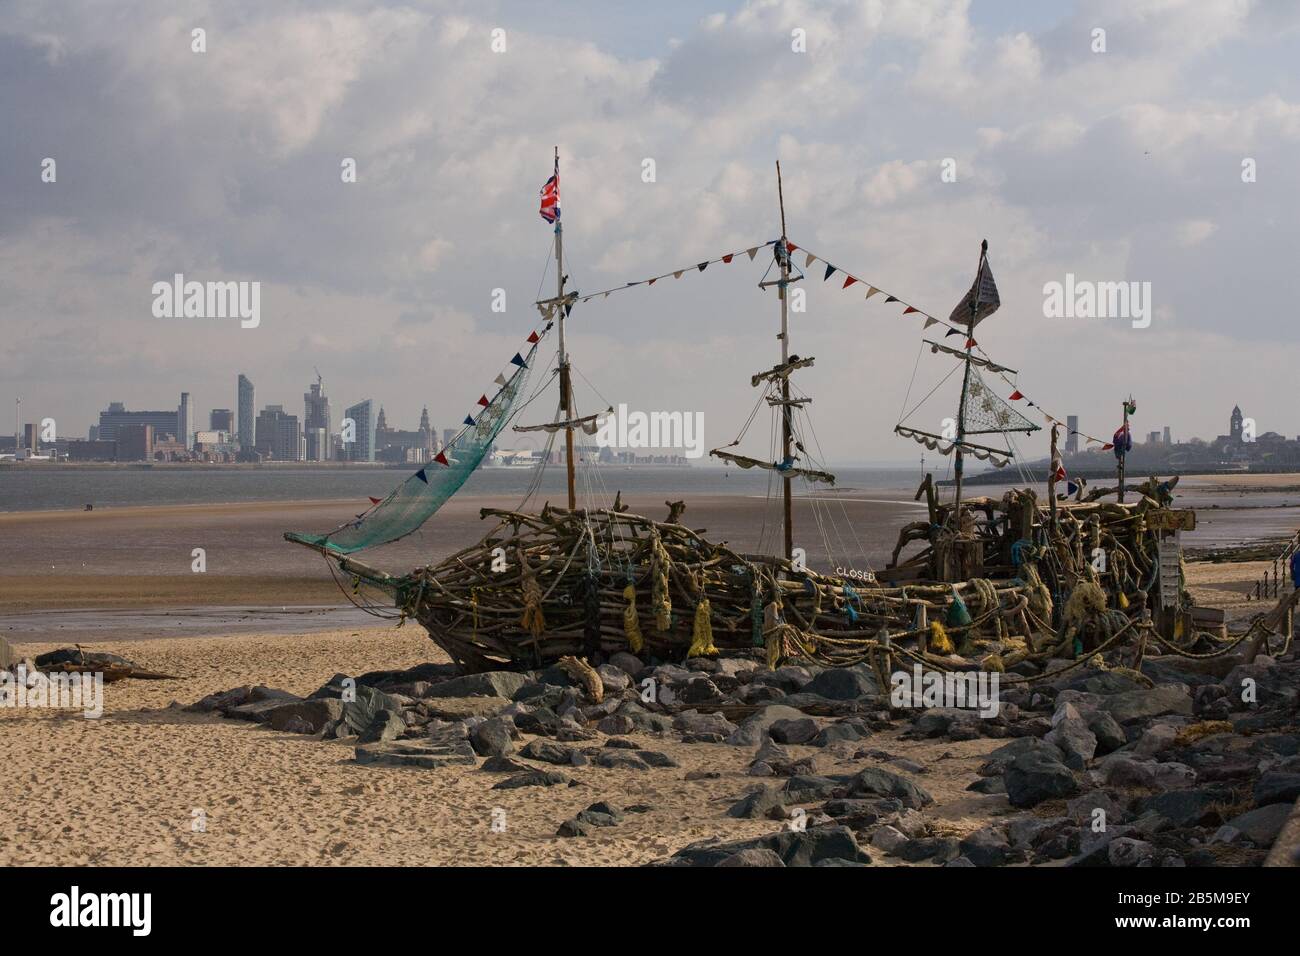 The black pearl pirate ship built from driftwood in the British seaside town of New Brighton on the banks of the River Mersey Stock Photo